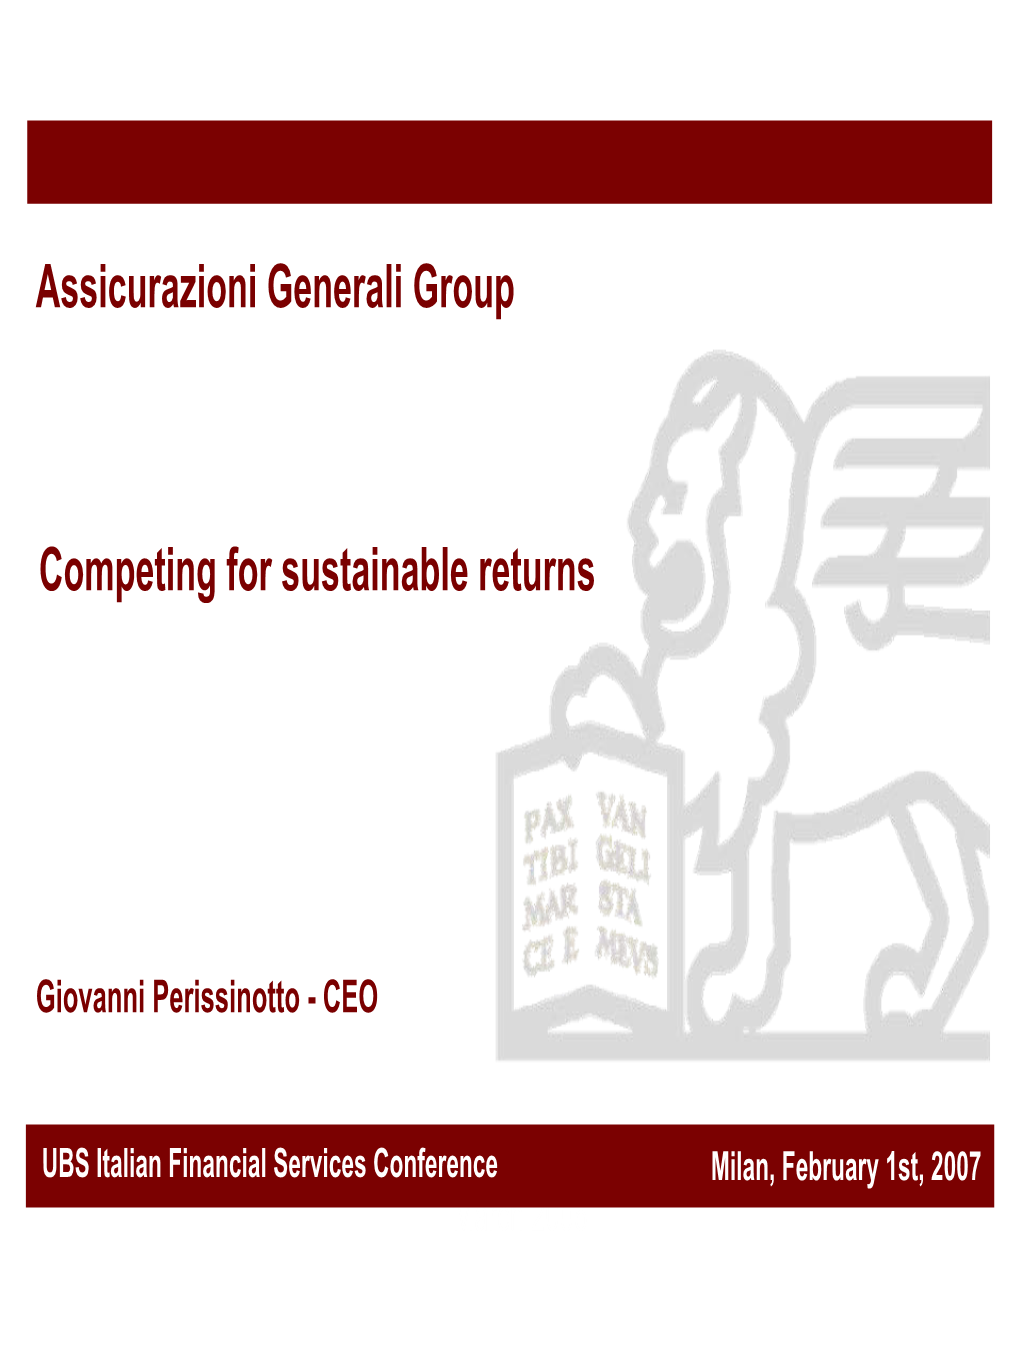 Assicurazioni Generali Group Competing for Sustainable Returns